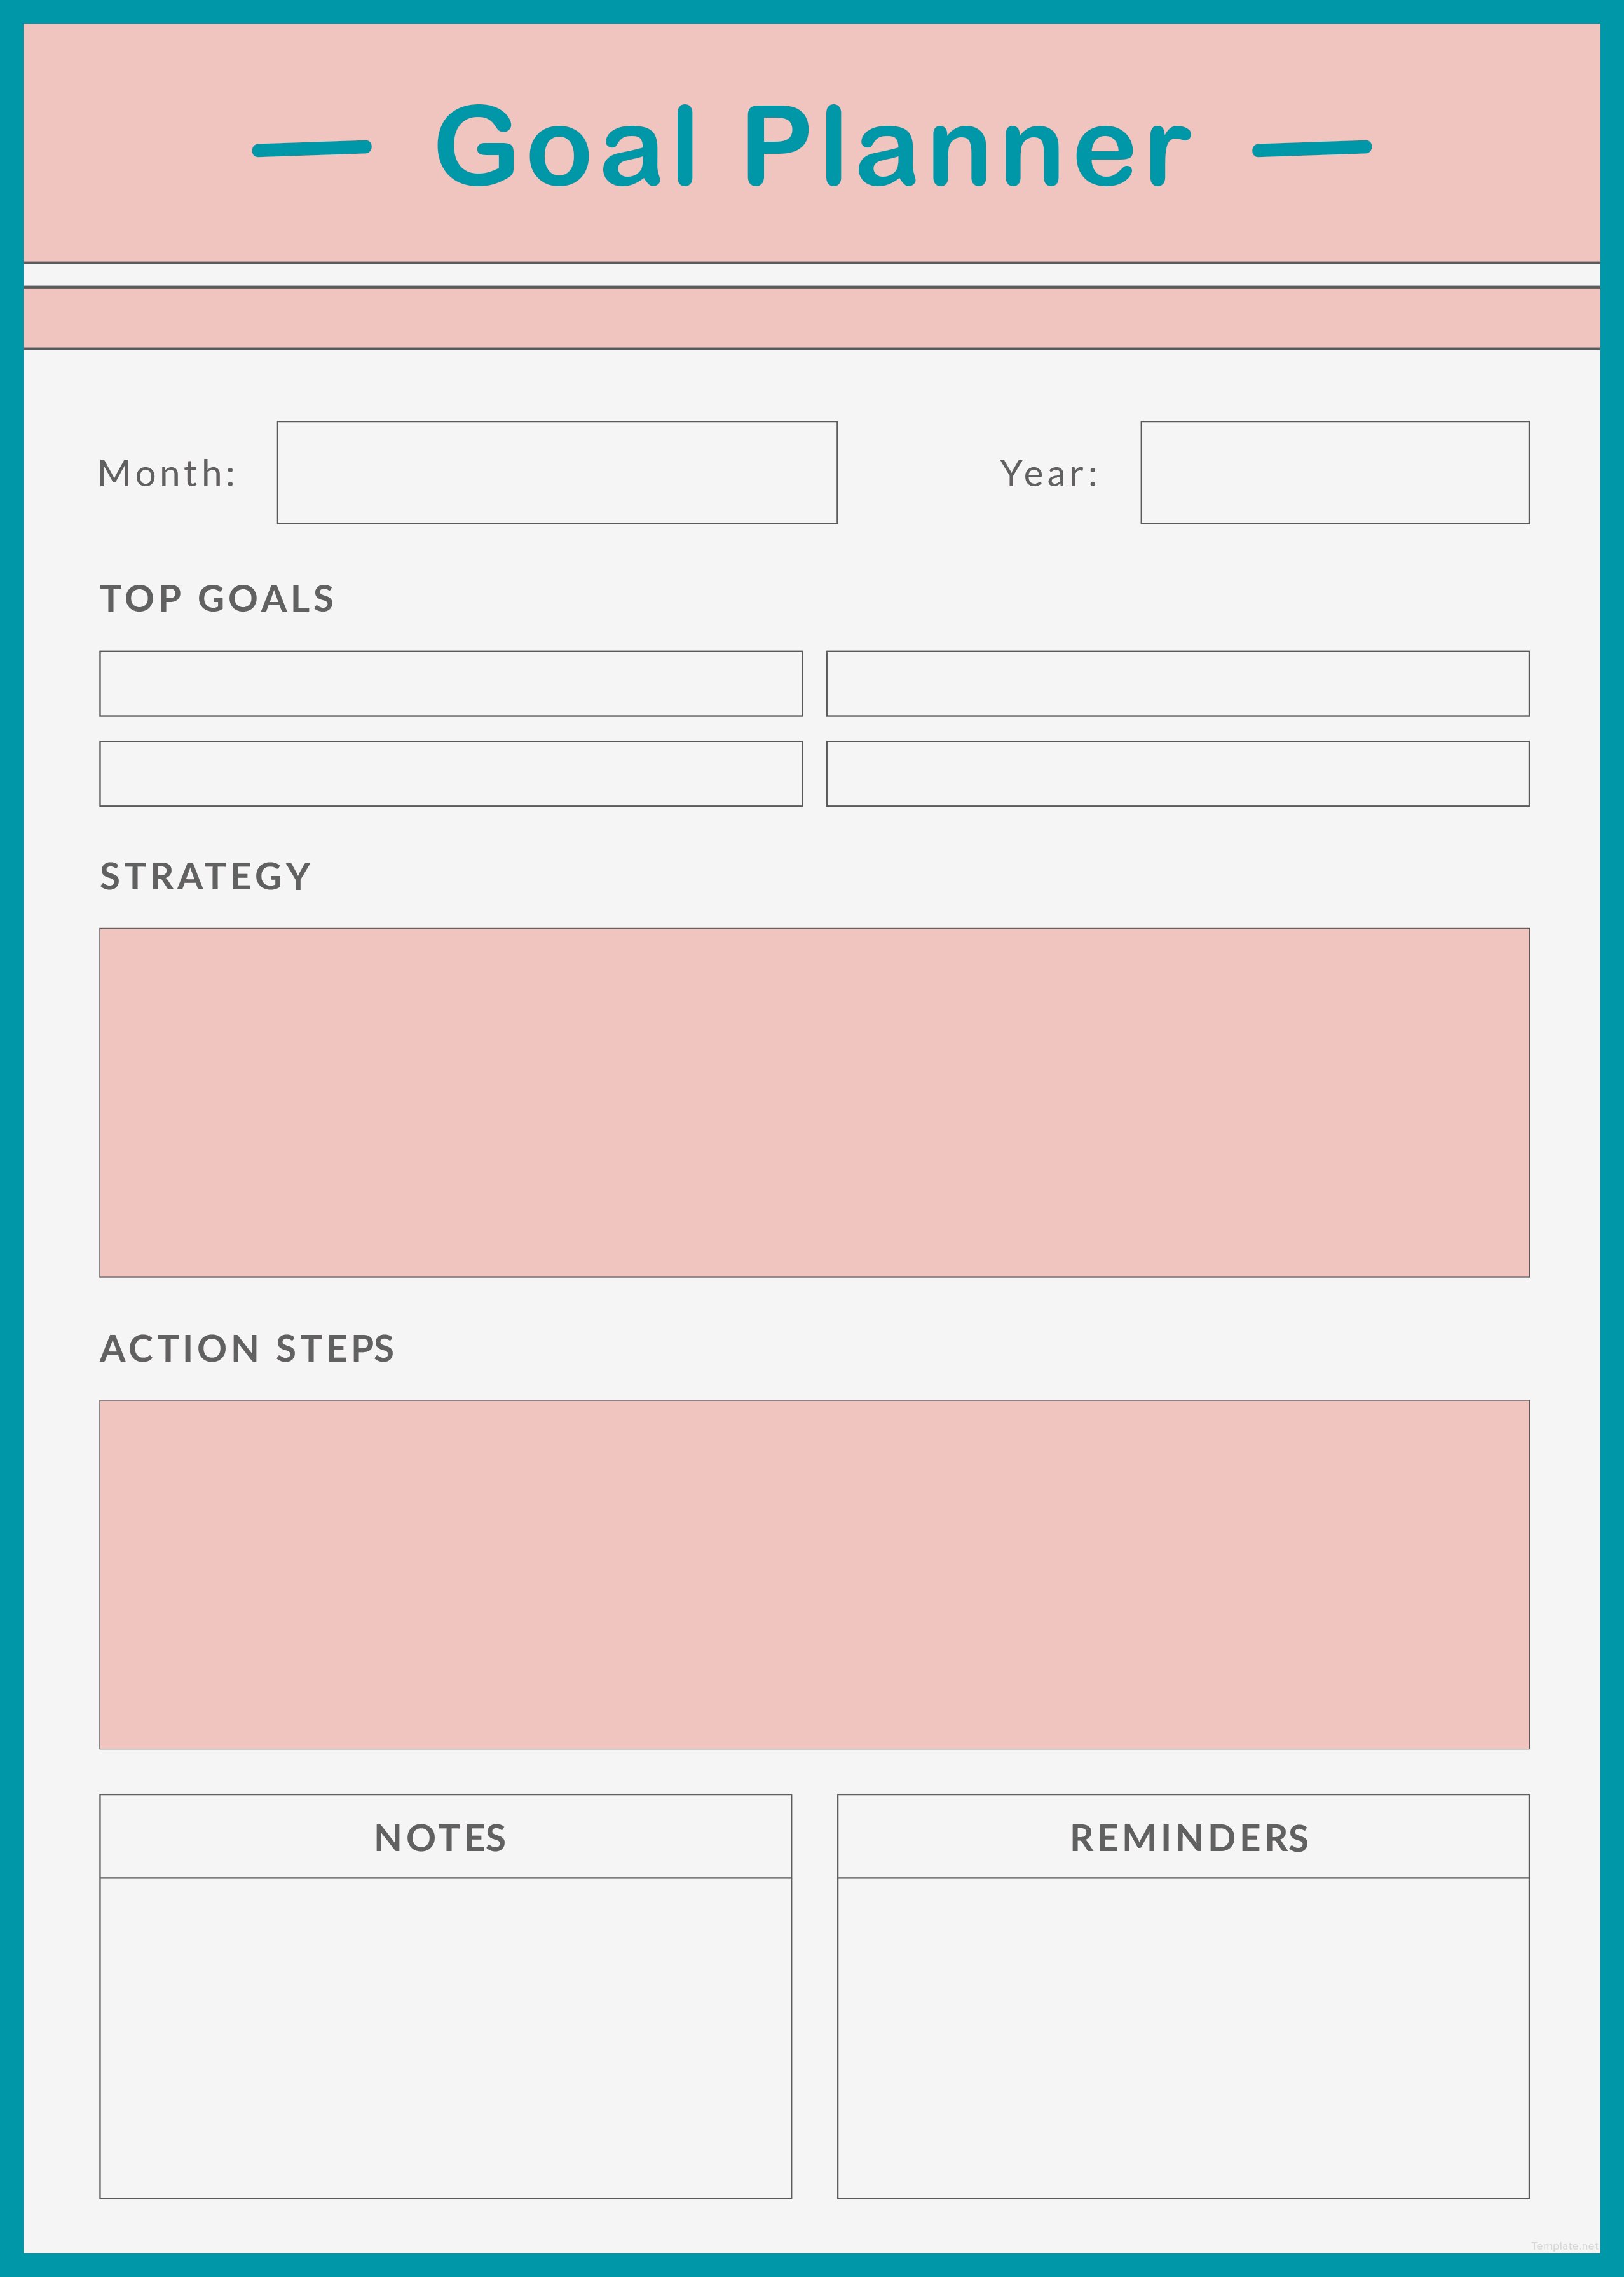 free-goal-planner-template-in-adobe-photoshop-illustrator-indesign